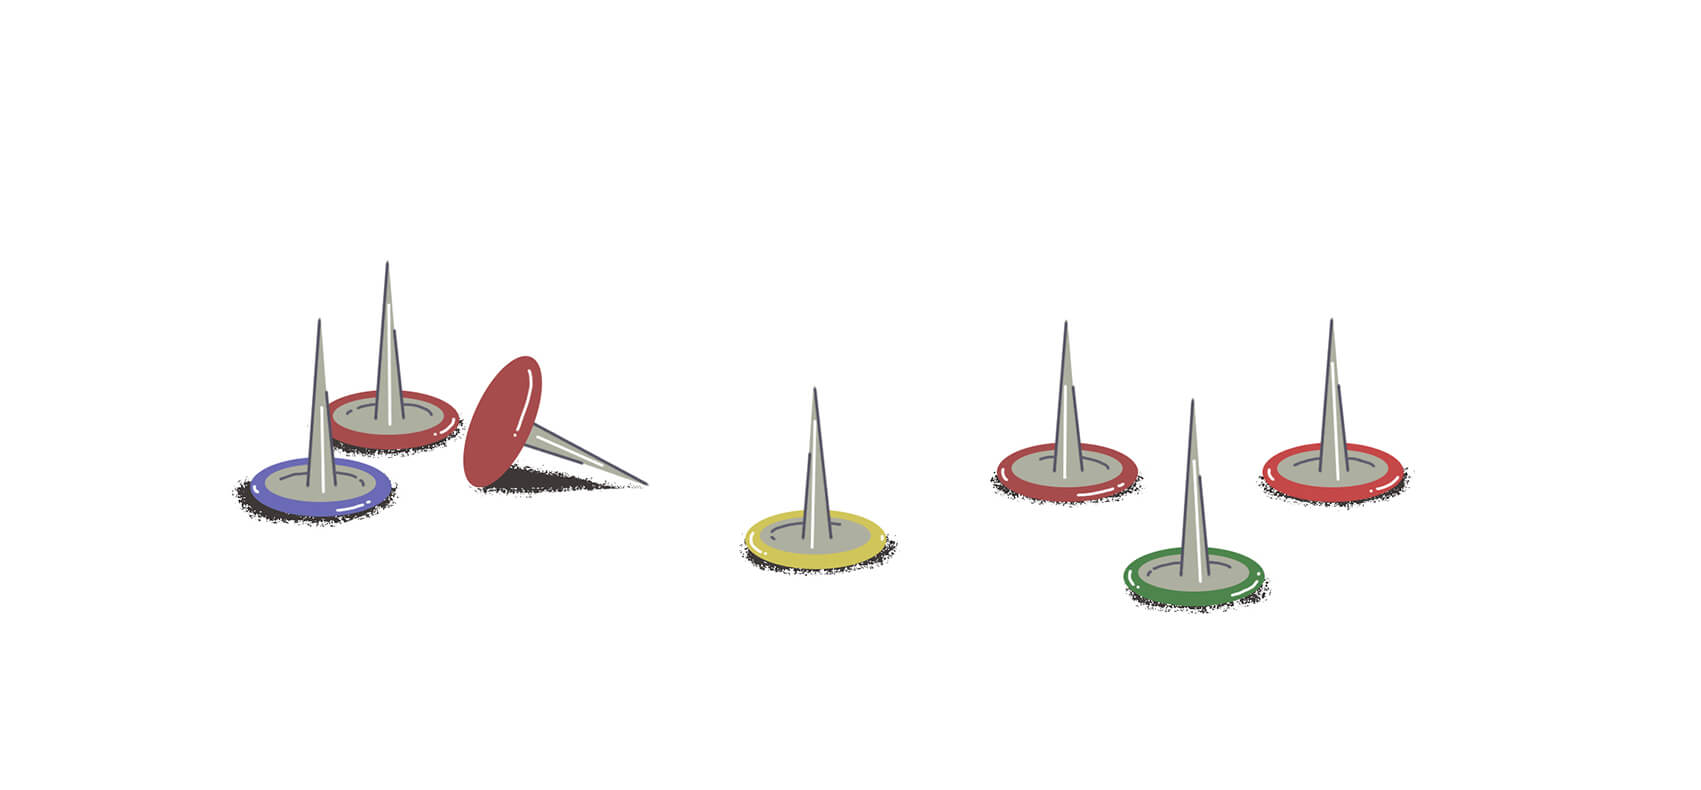 Pointy pins, with the pointy part turned up, left on the ground